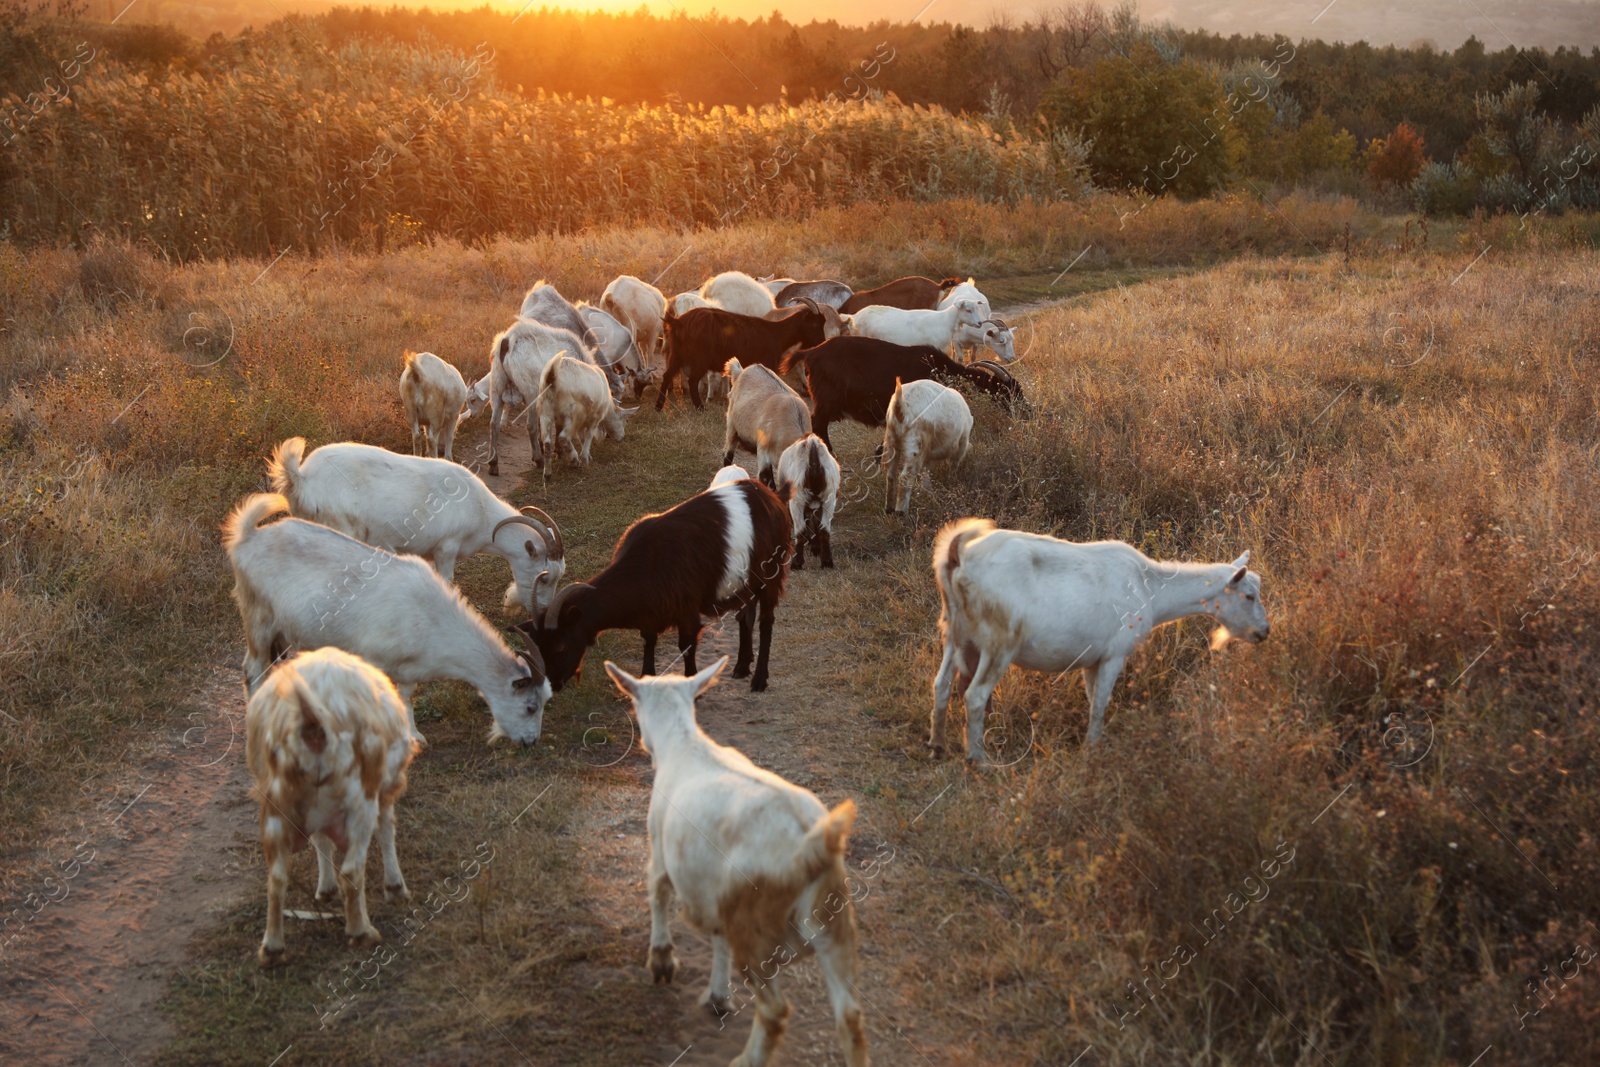 Photo of Farm animals. Goats on dirt road near pasture in evening